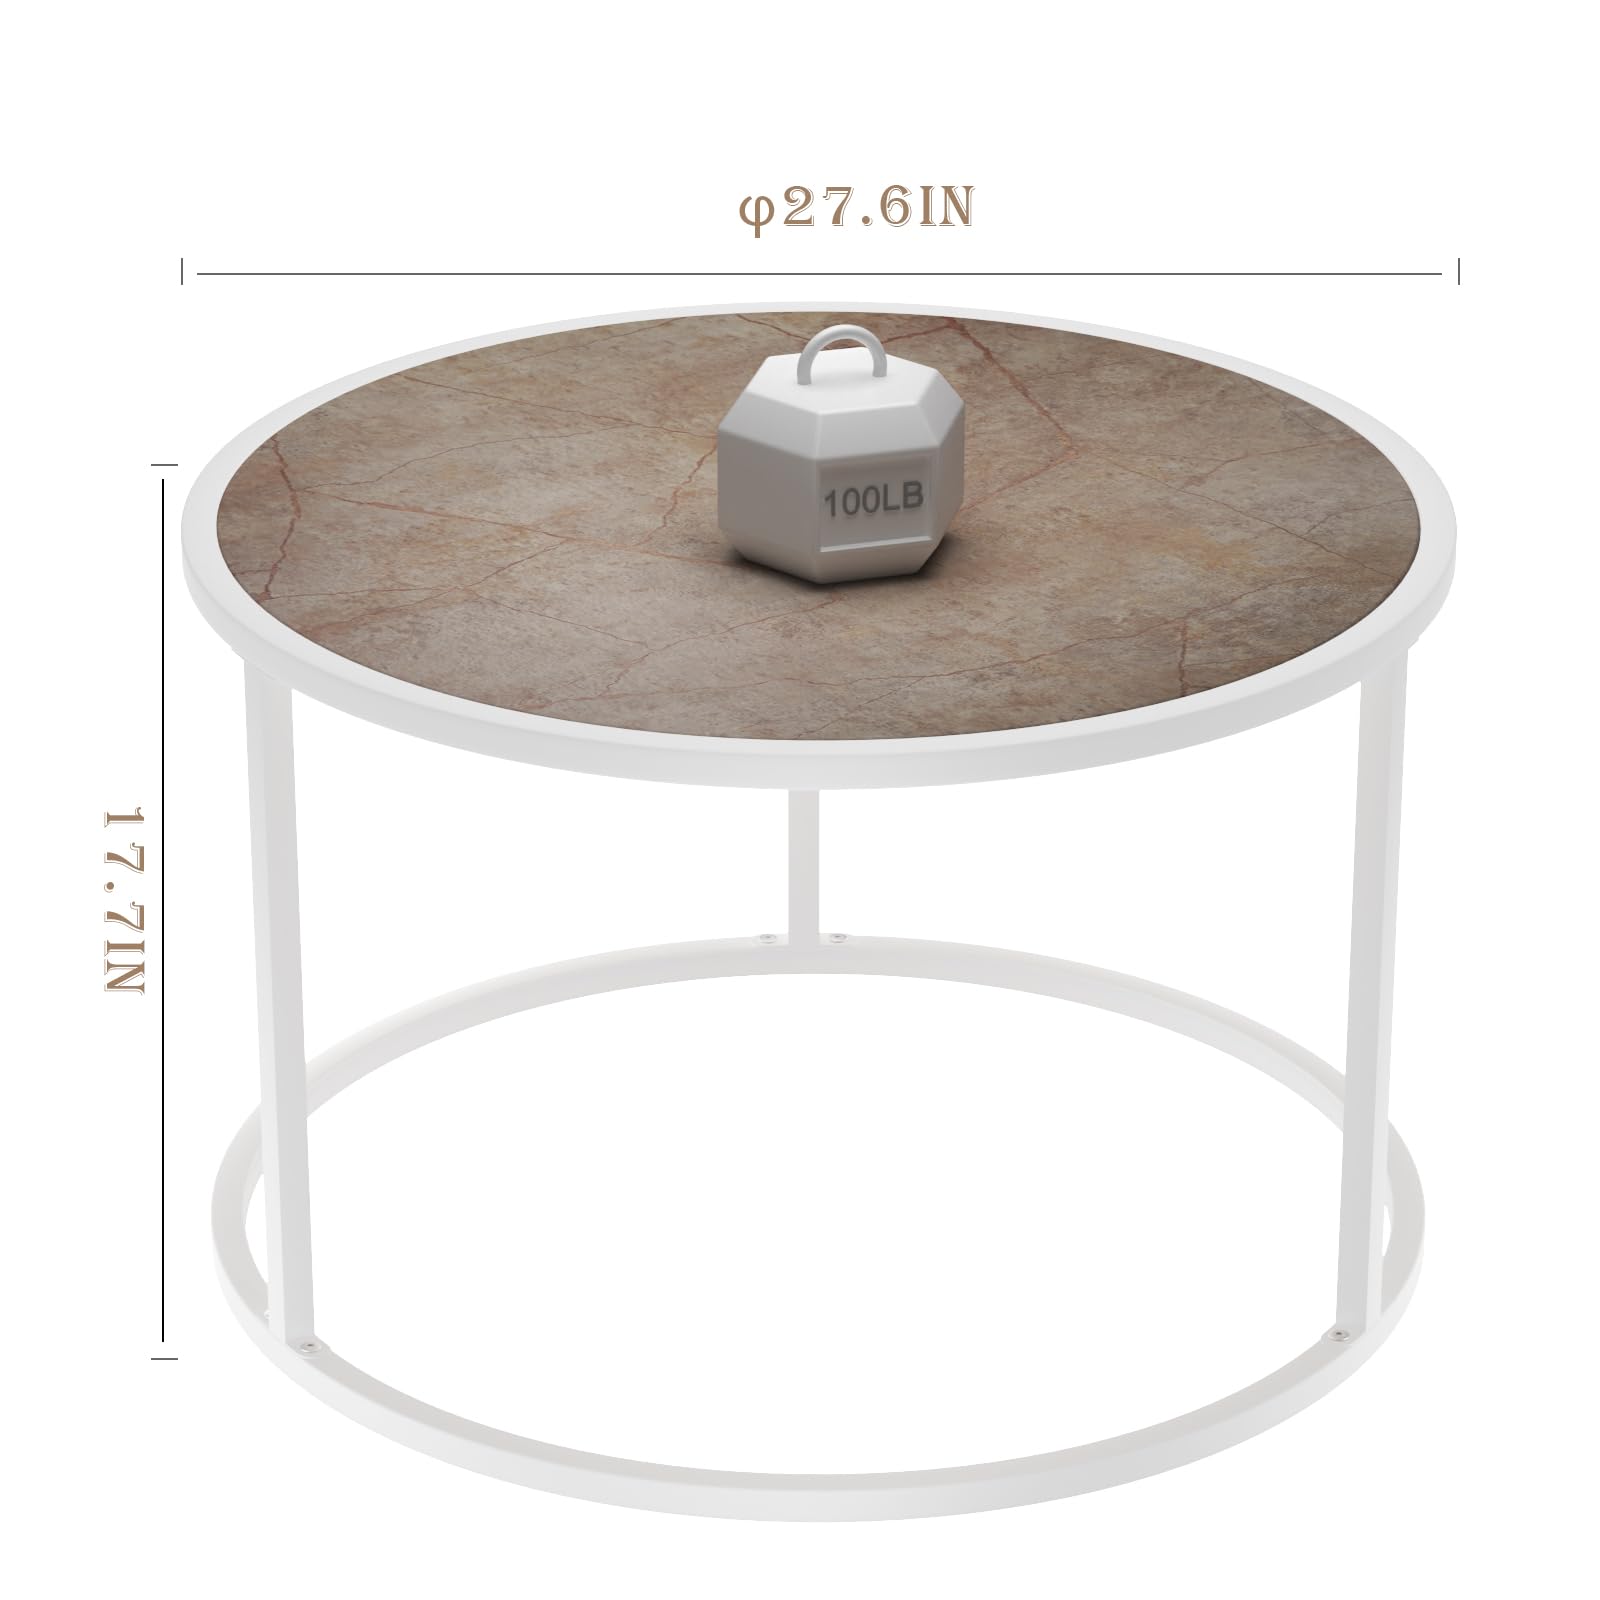 SAYGOER Marble Coffee Table Small Round Center Table Simple Modern Boho for Living Room Home Office, 27.6 * 27.6 * 17.7, Easy Assembly, Cream White Faux Marble